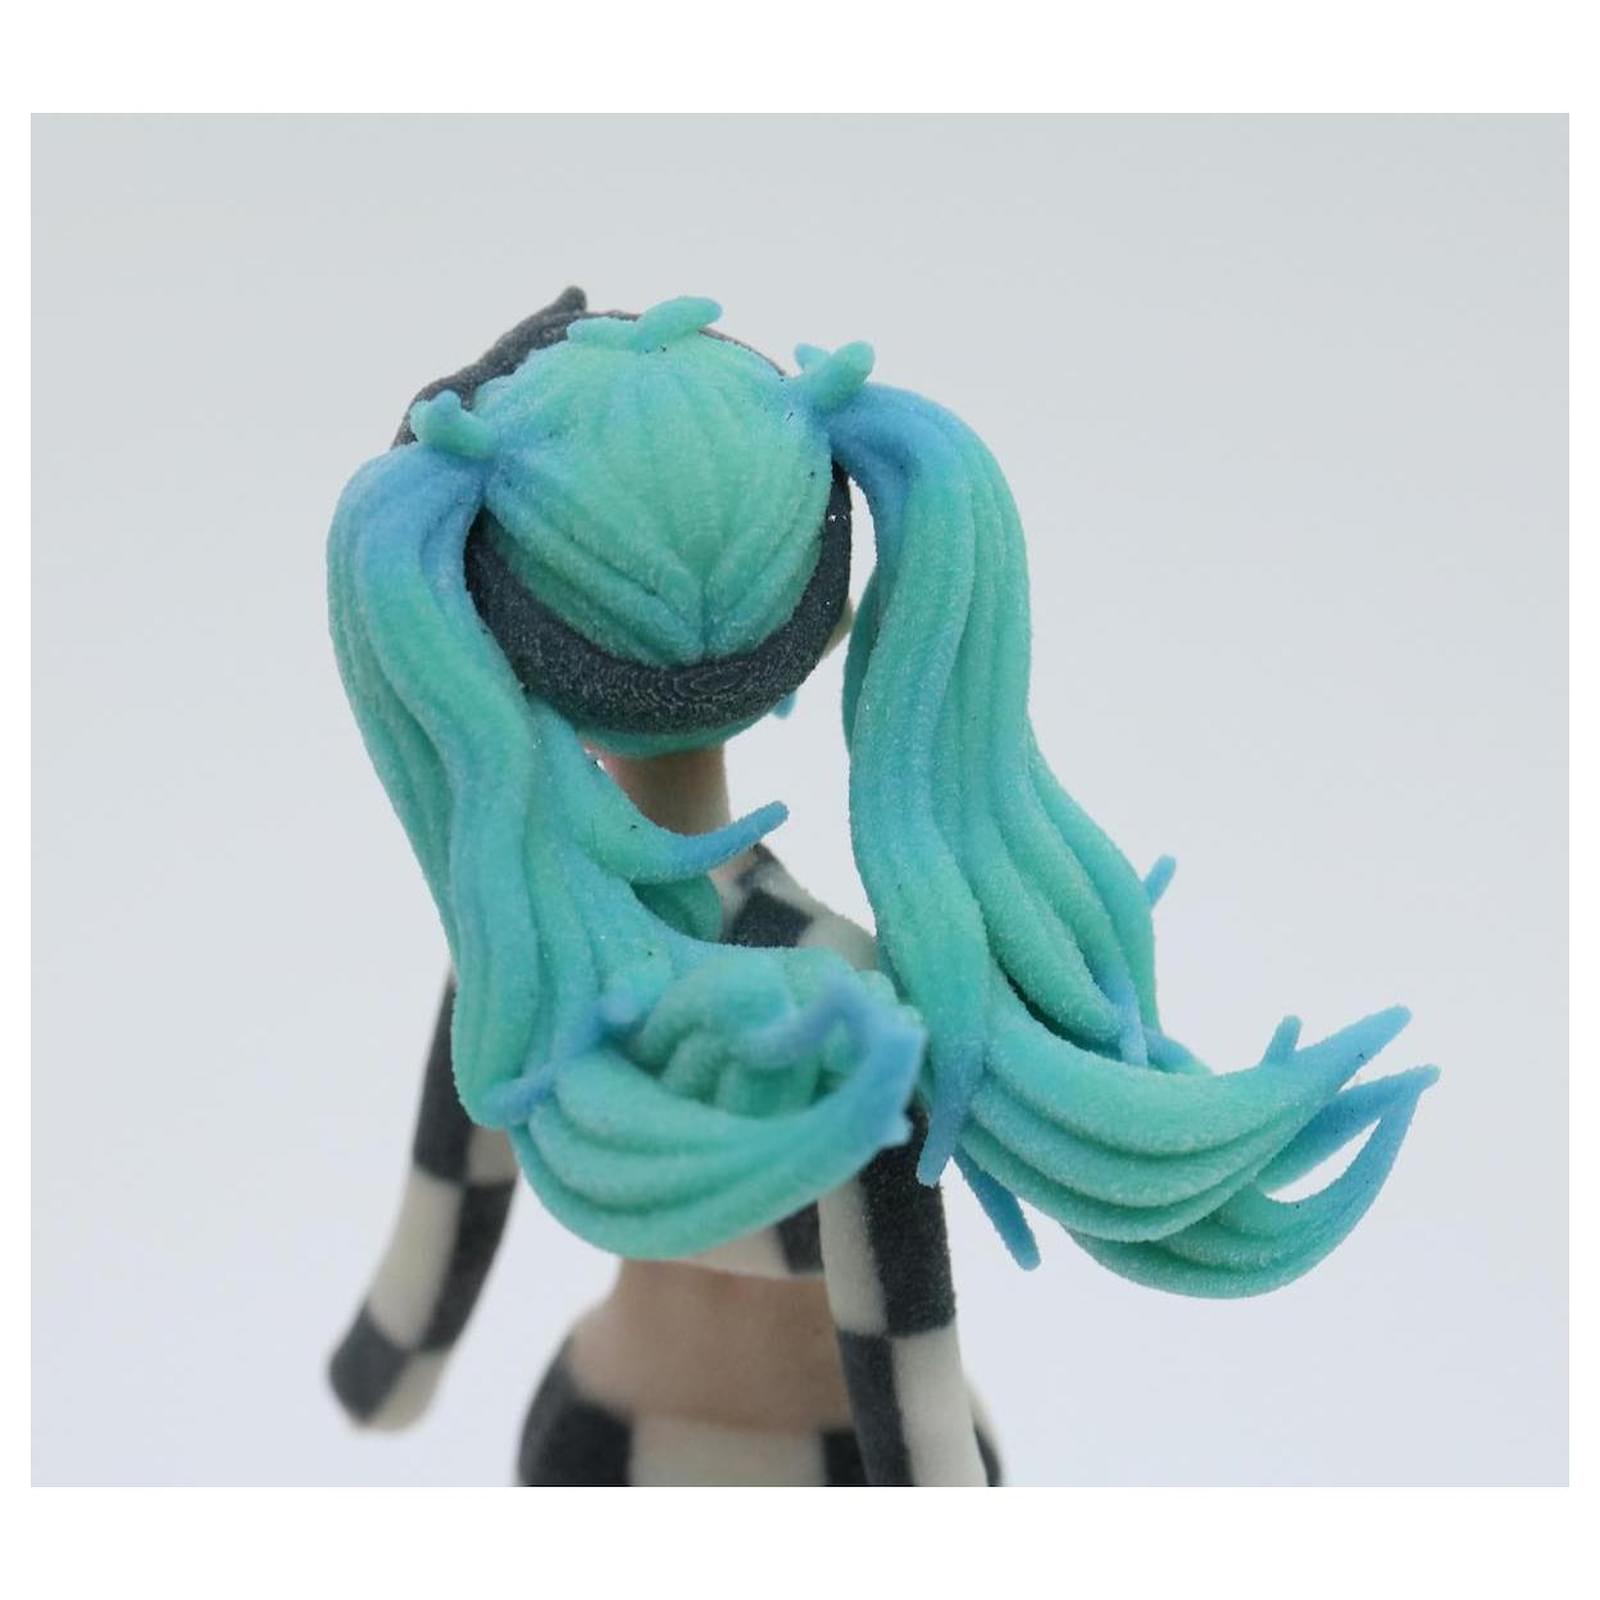 Life-Sized Hatsune Miku The End Dressed in Louis Vuitton — Lifted Geek